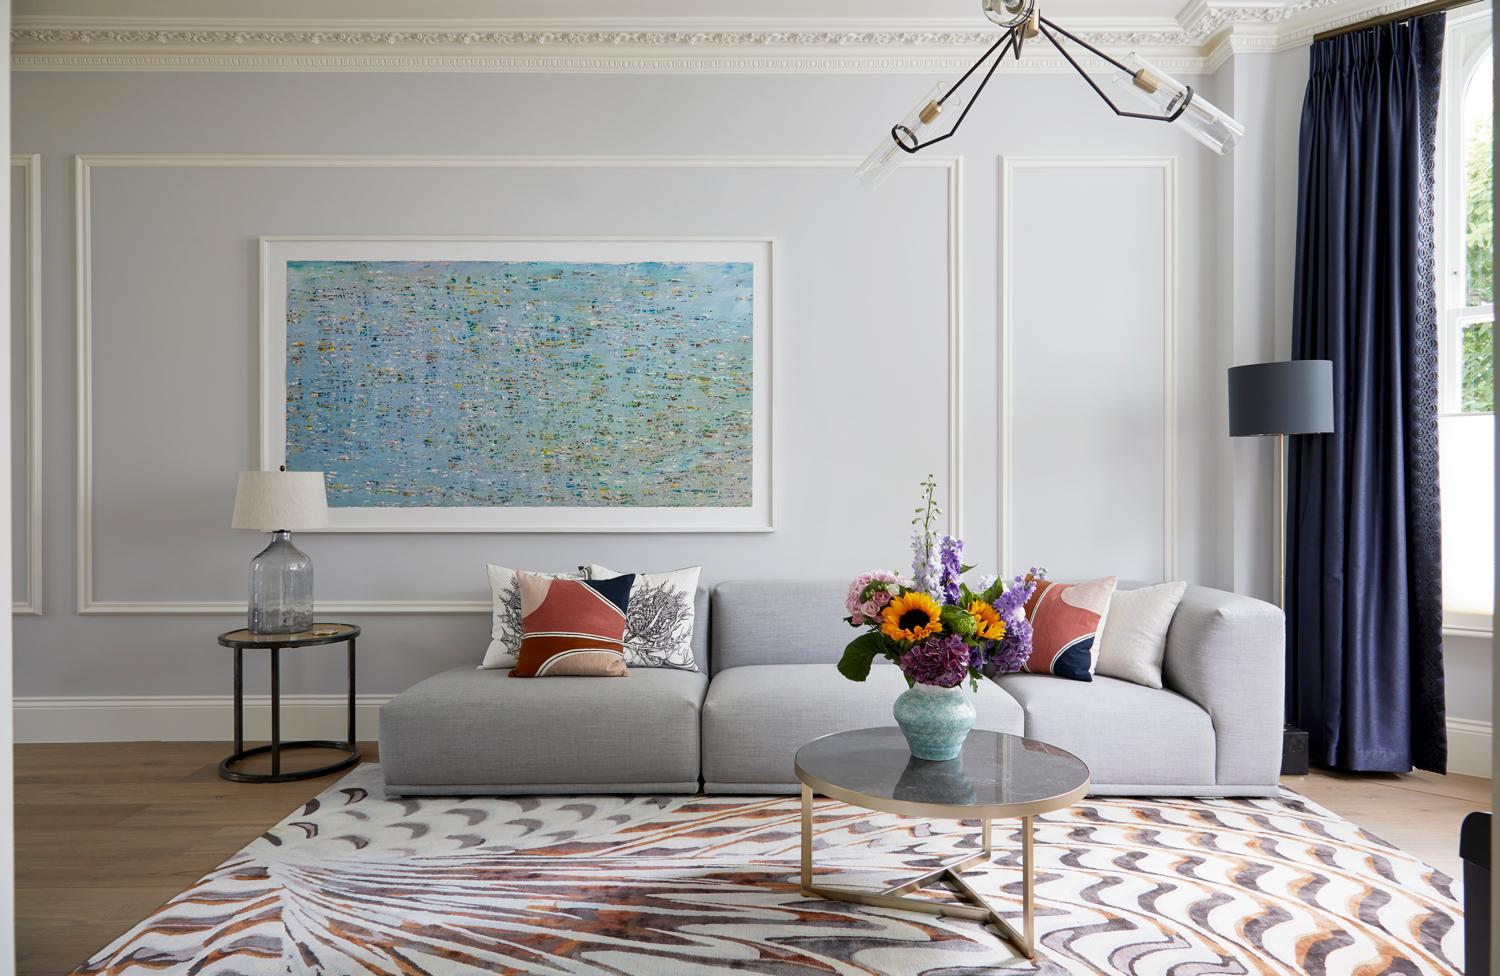 Drawing room in a Kensington townhouse featuring a limited-edition Pheasant rug from The Rug Company inspired by Chihuly's glasswork. The rug's design resembles the wing-like motif of a pheasant, twisting and contorting across the composition. A three-piece modular sofa with clear lines and precise proportions, designed by Andersen & Voll, provides comfortable seating upholstered in textiles from Kvadrat.